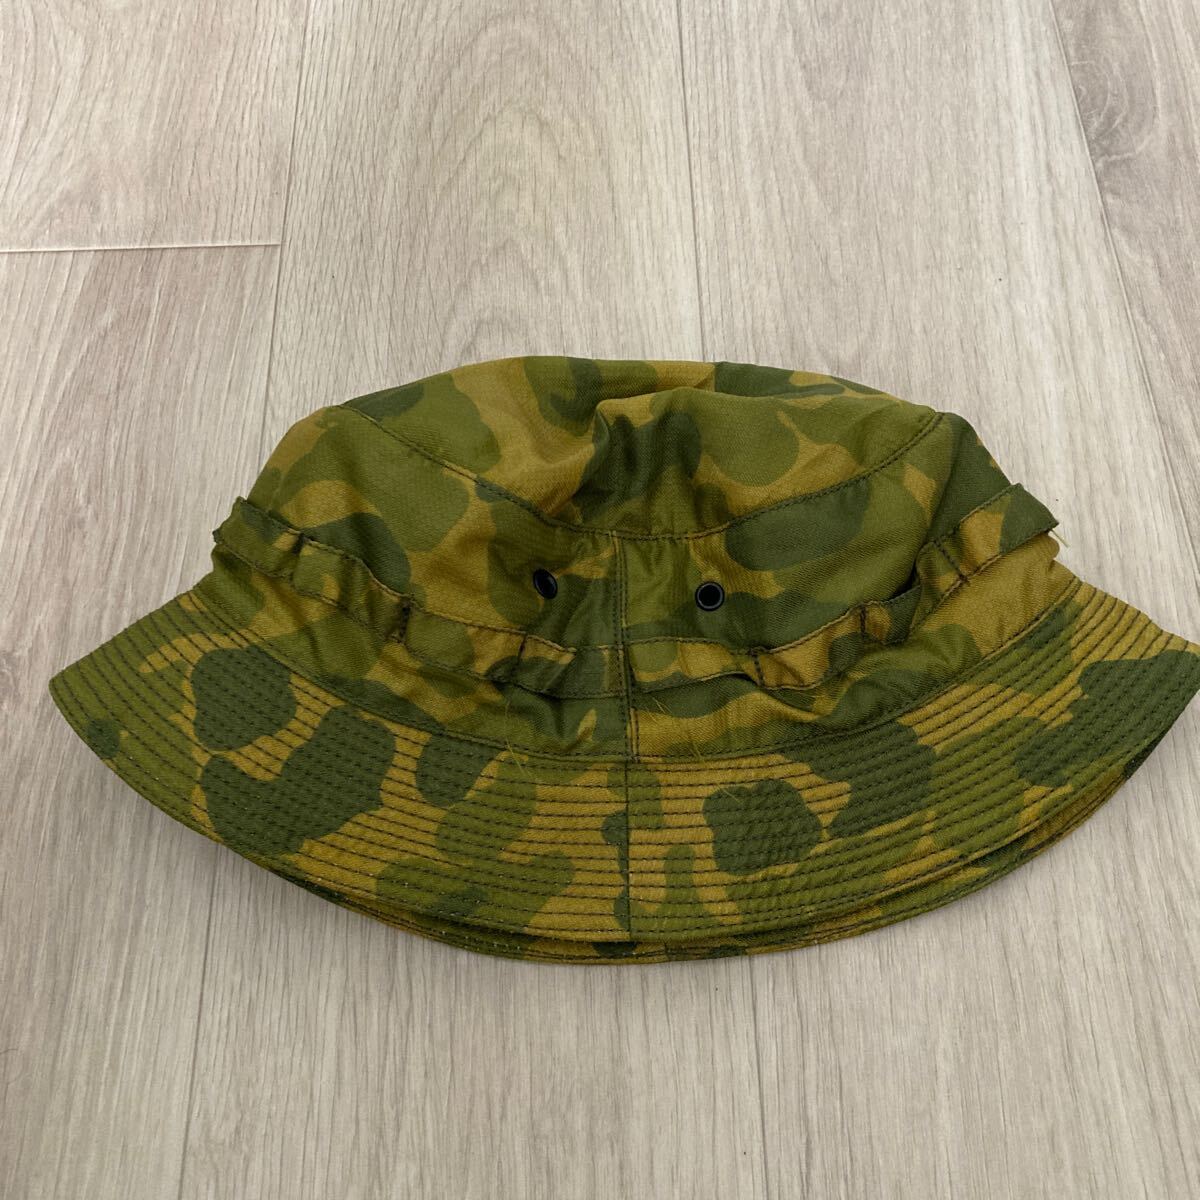  Vietnam war the truth thing pala Shute cloth b- knee hat green bere-SOG special squad 